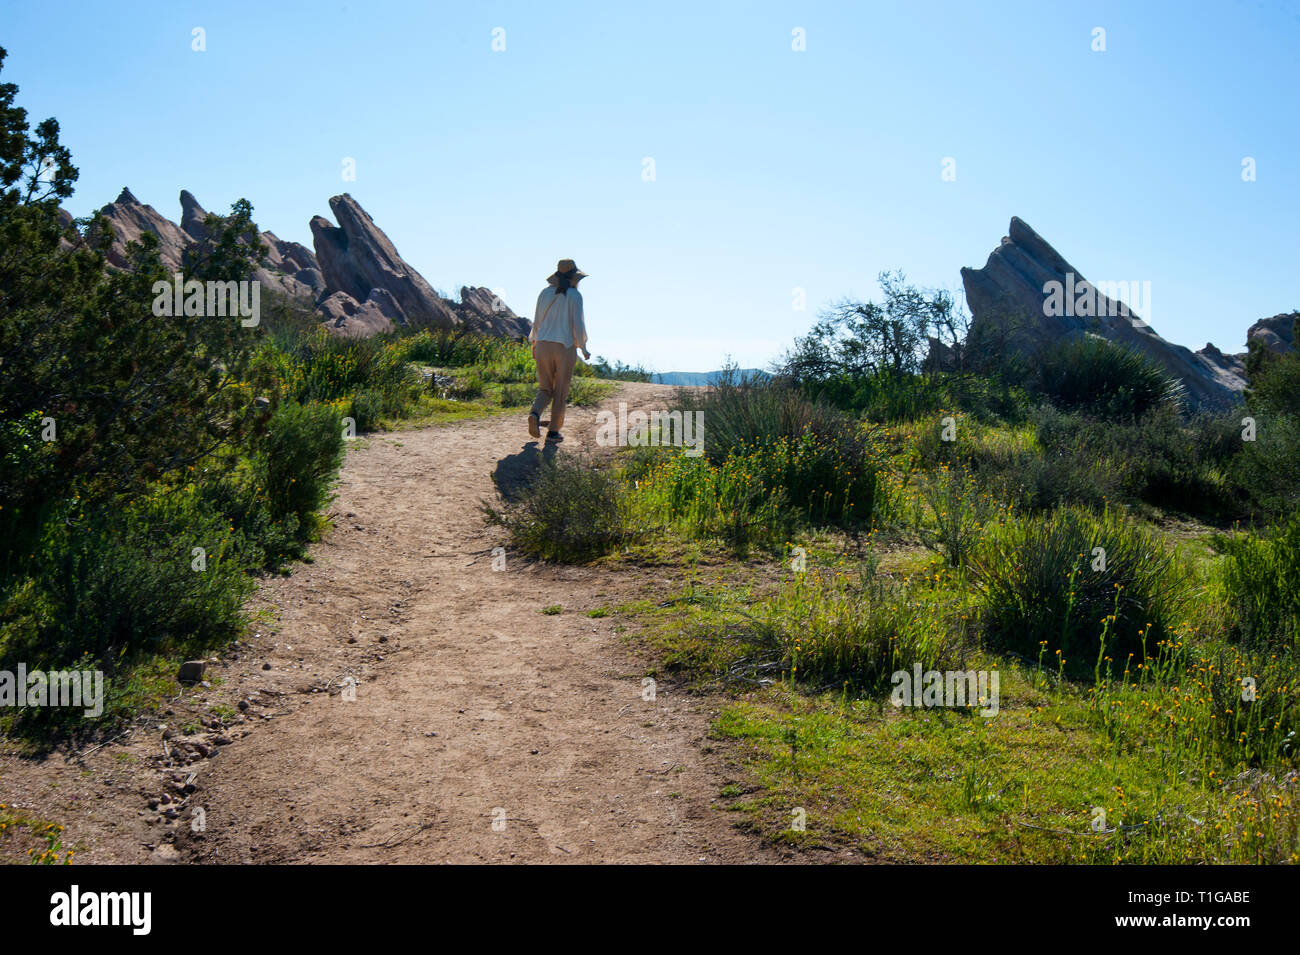 Visitor at Vasquez Rocks near Agua Dulce in the Antelope Valley in Southern California, USA Stock Photo